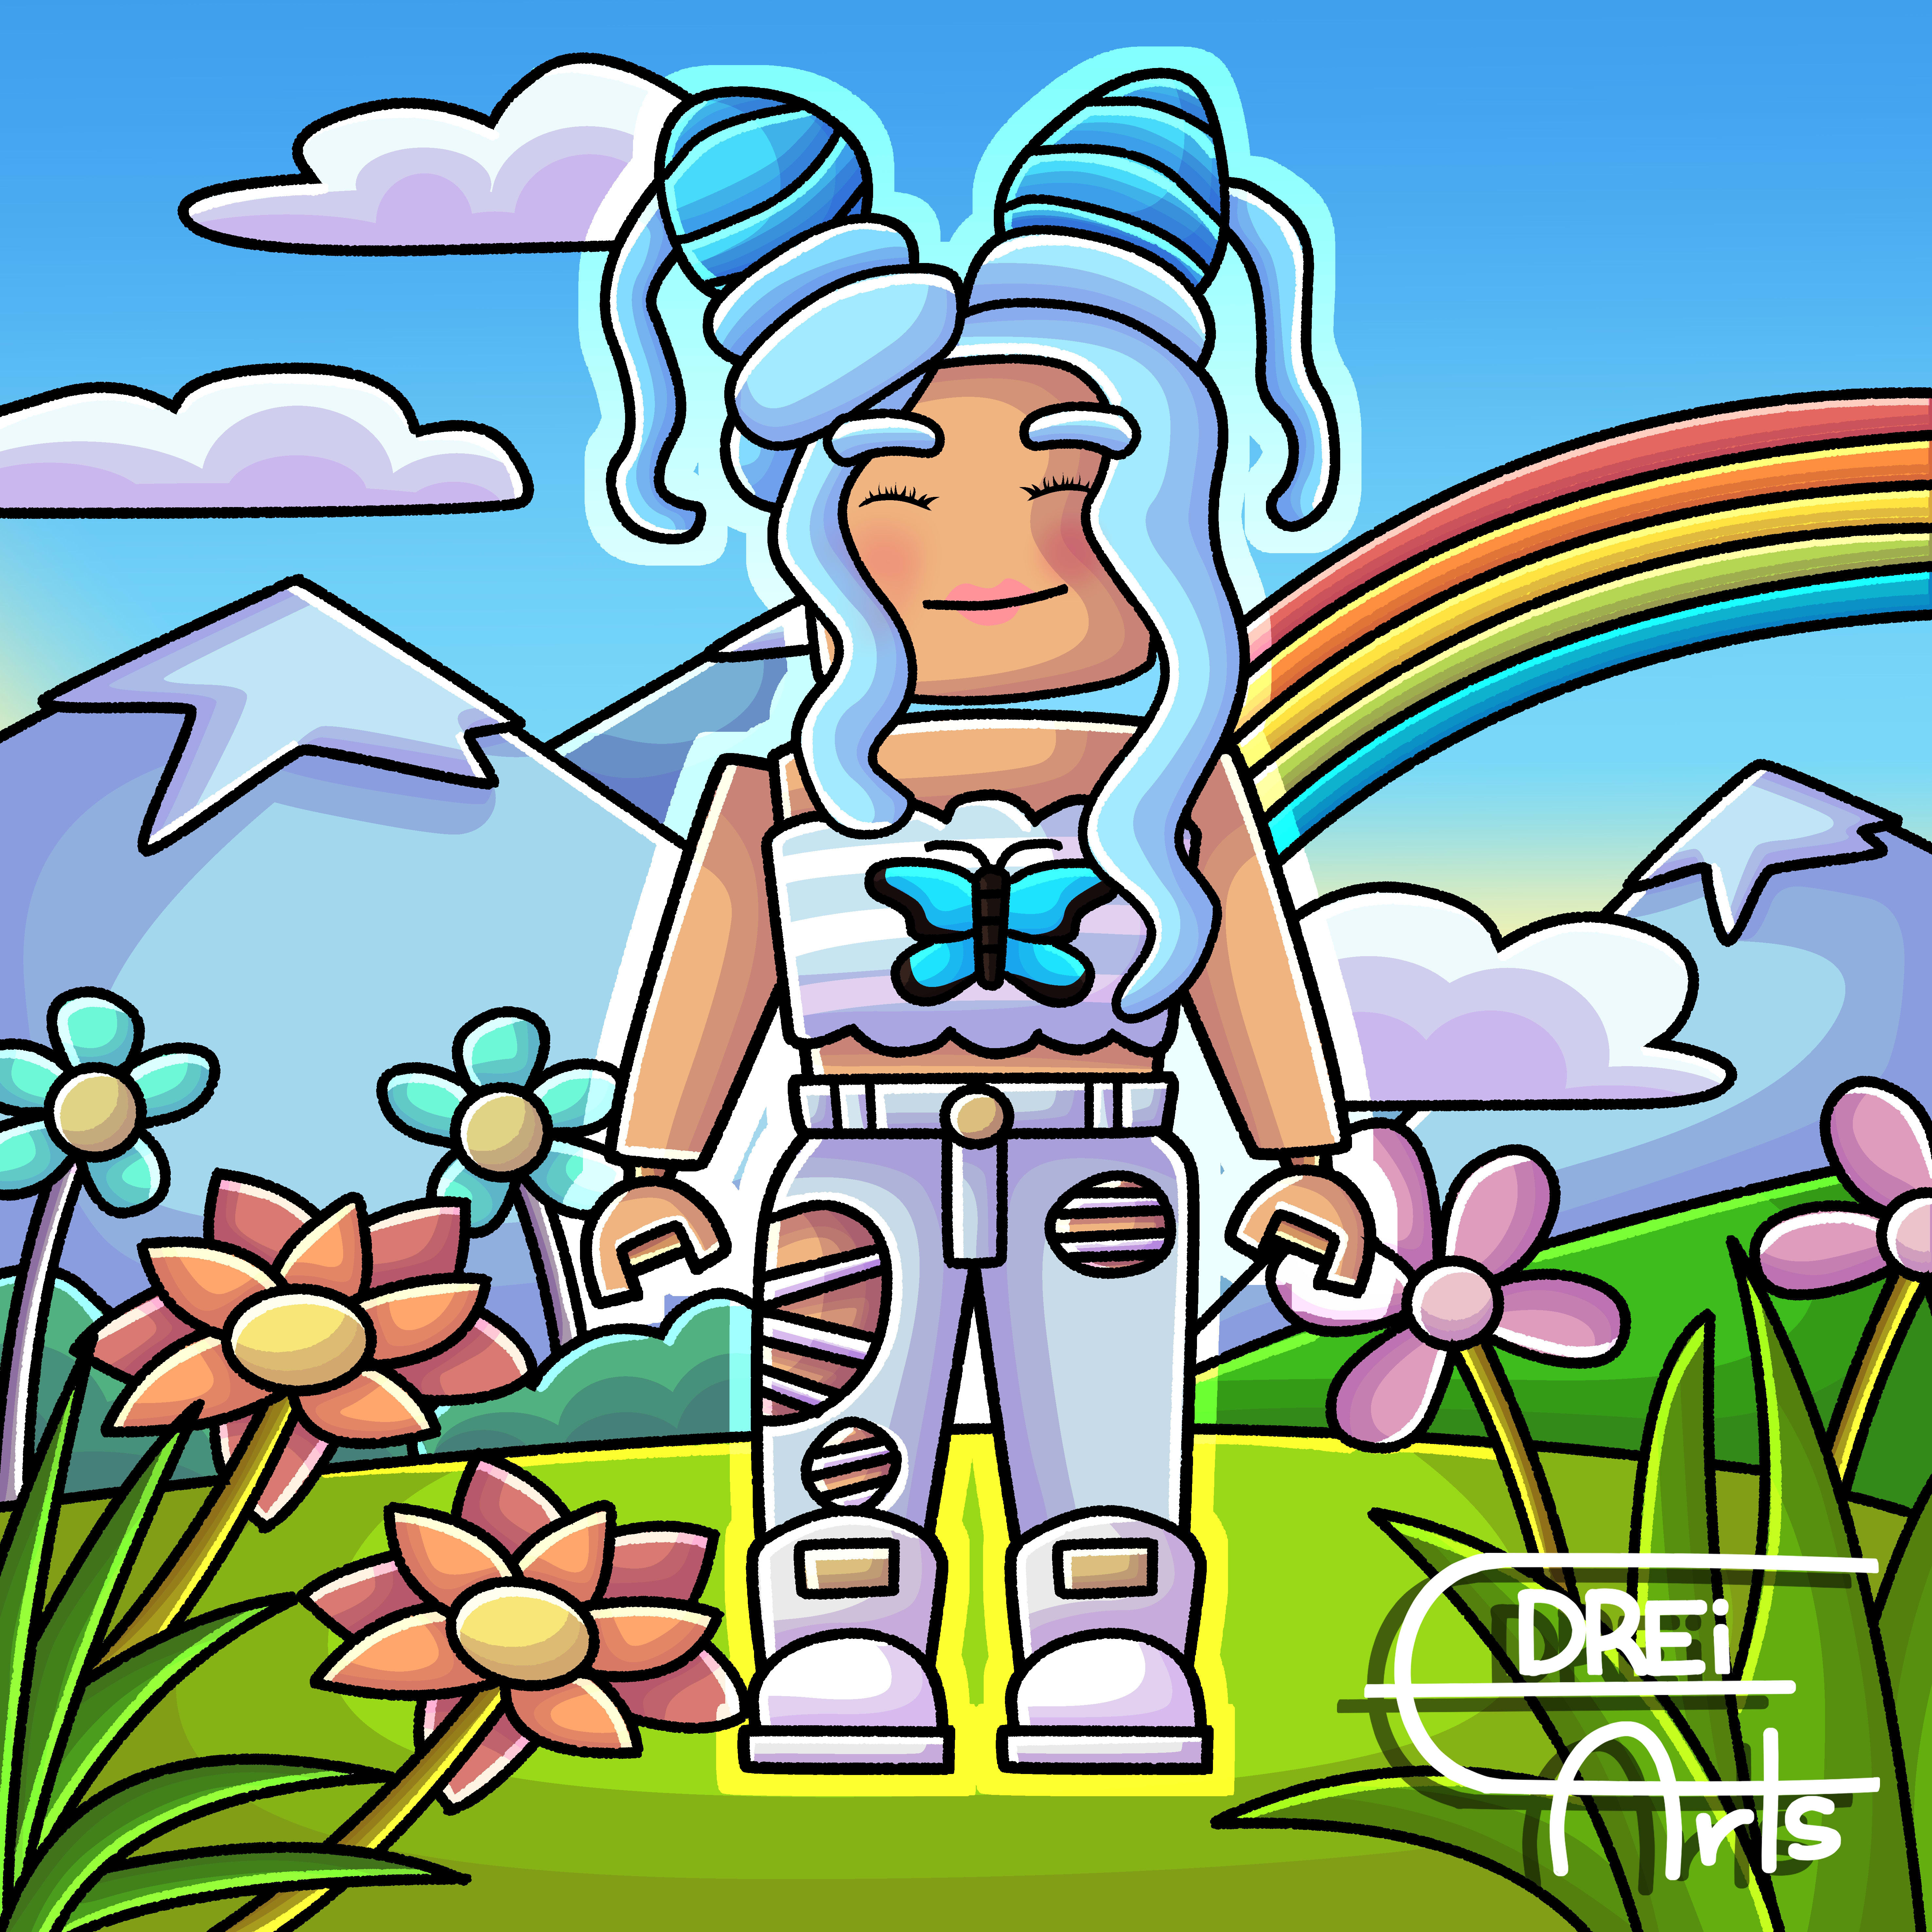 Draw Your Roblox Skin In Cartoon Style By Edreiarts - skin sketchyt roblox